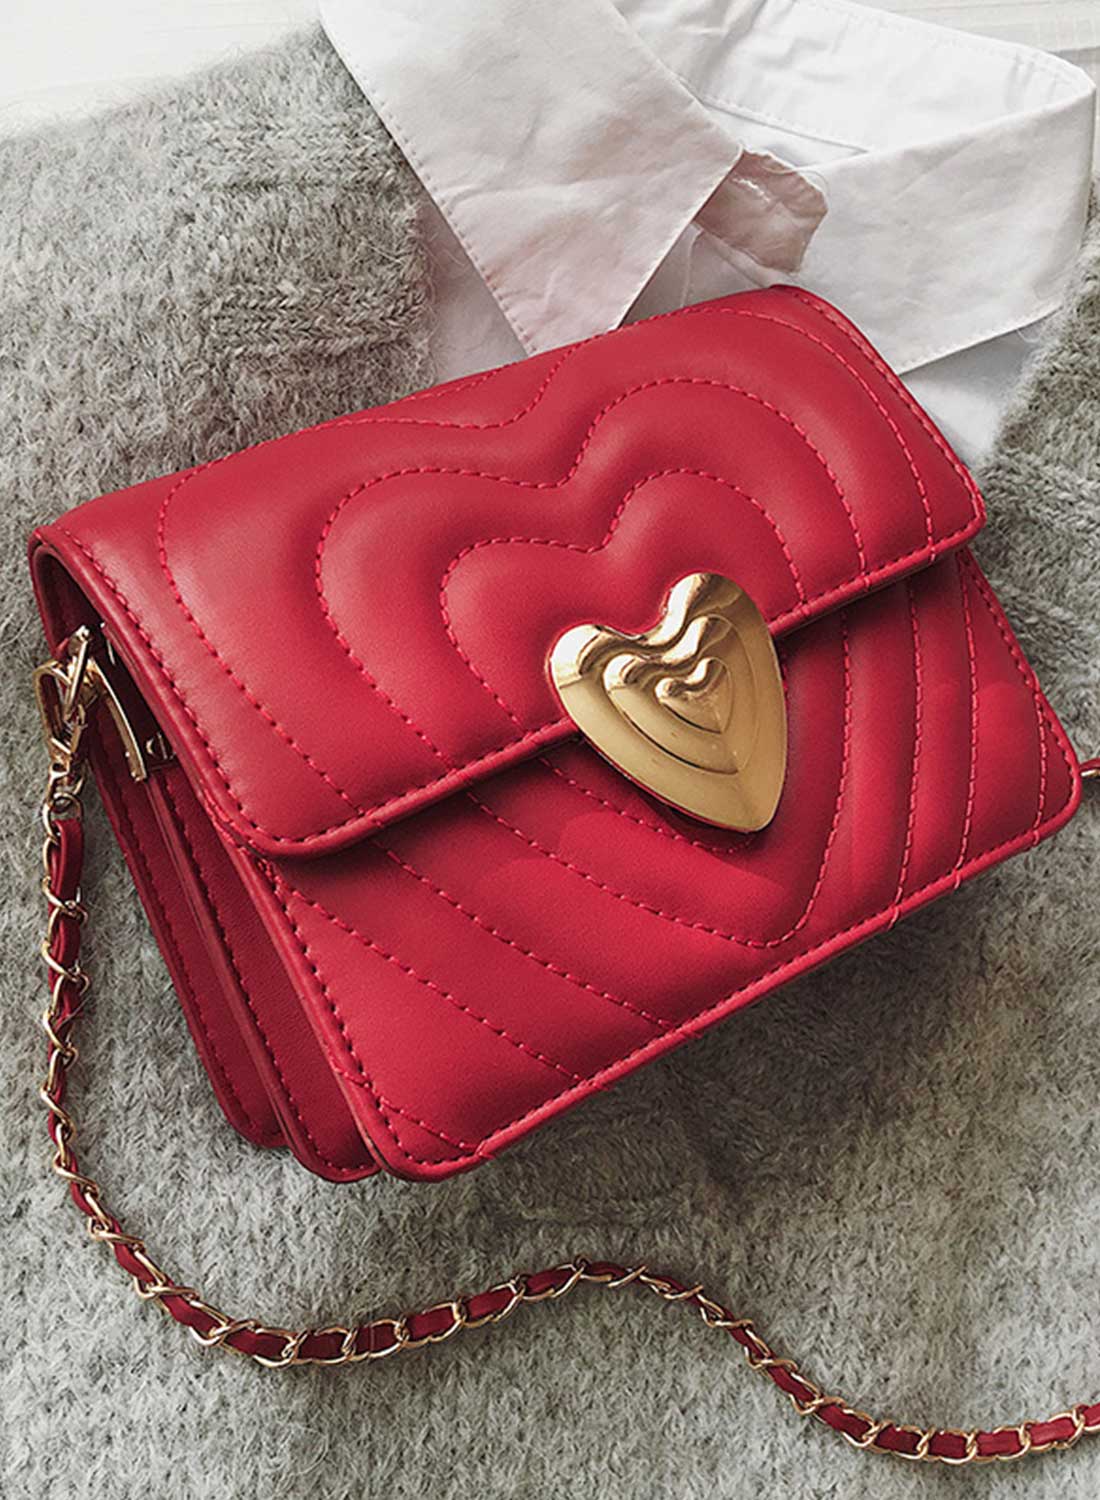 Women's Messenger Bag Heart-shaped Solid Soft Leather Casual Bag